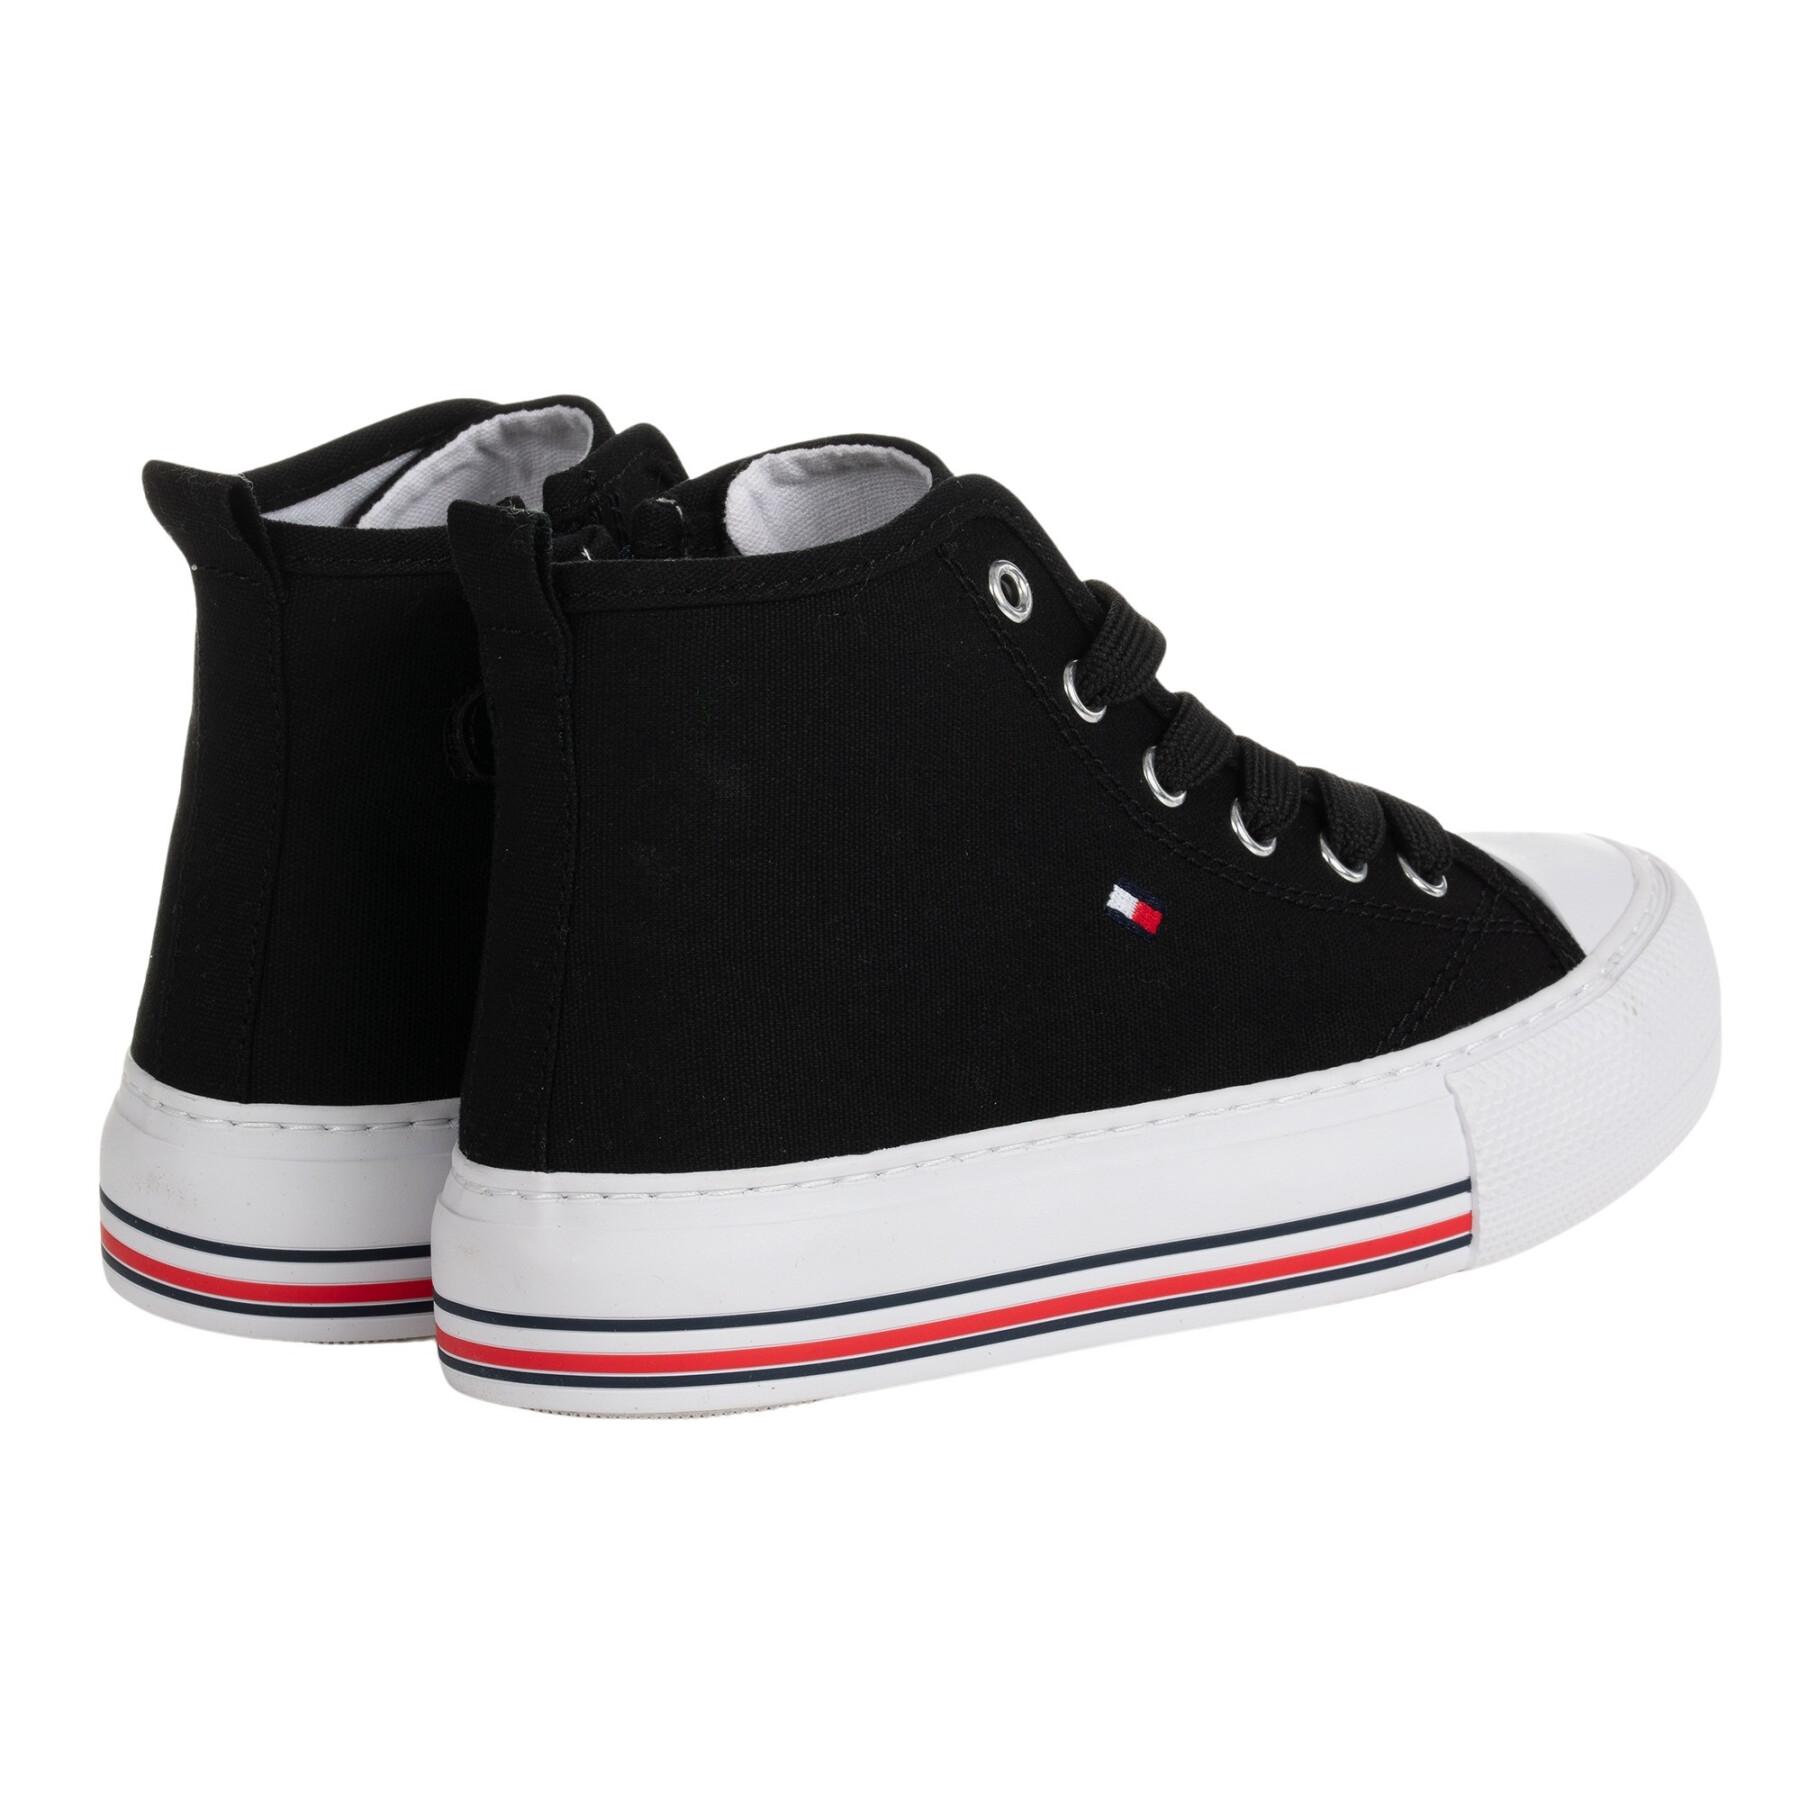 Women's high top sneakers Tommy Hilfiger Black